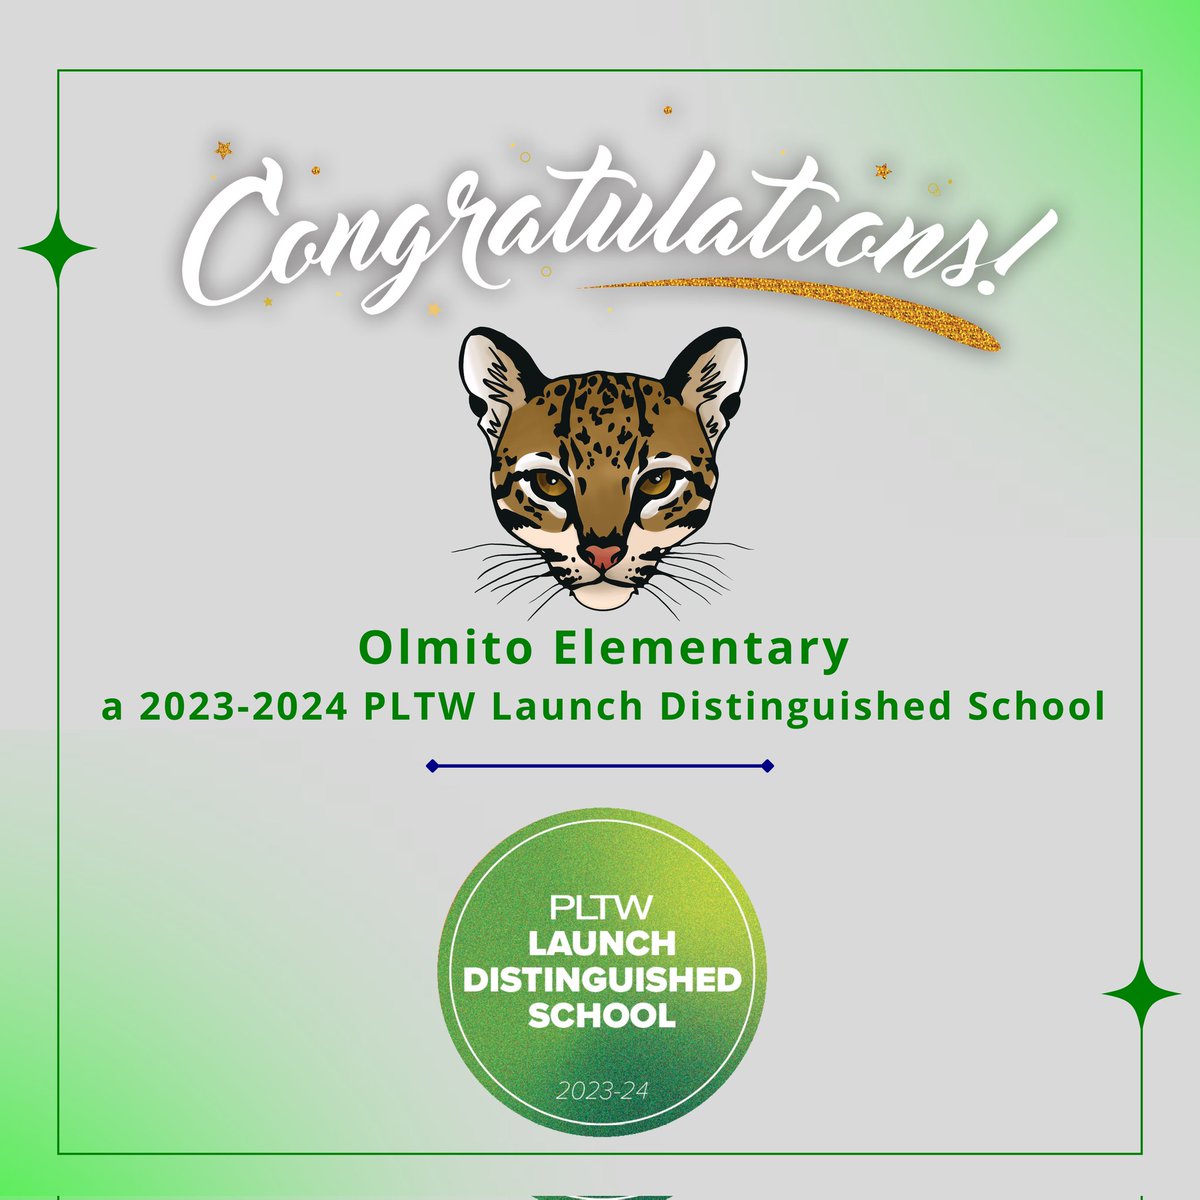 ⭐Olmito has received recognition from @PLTWorg as a 2023-24 Distinguished Launch School, which recognizes schools across the U.S. for their efforts to provide access to transformative learning experiences for students through PLTW Launch programs, an elementary STEM curriculum.